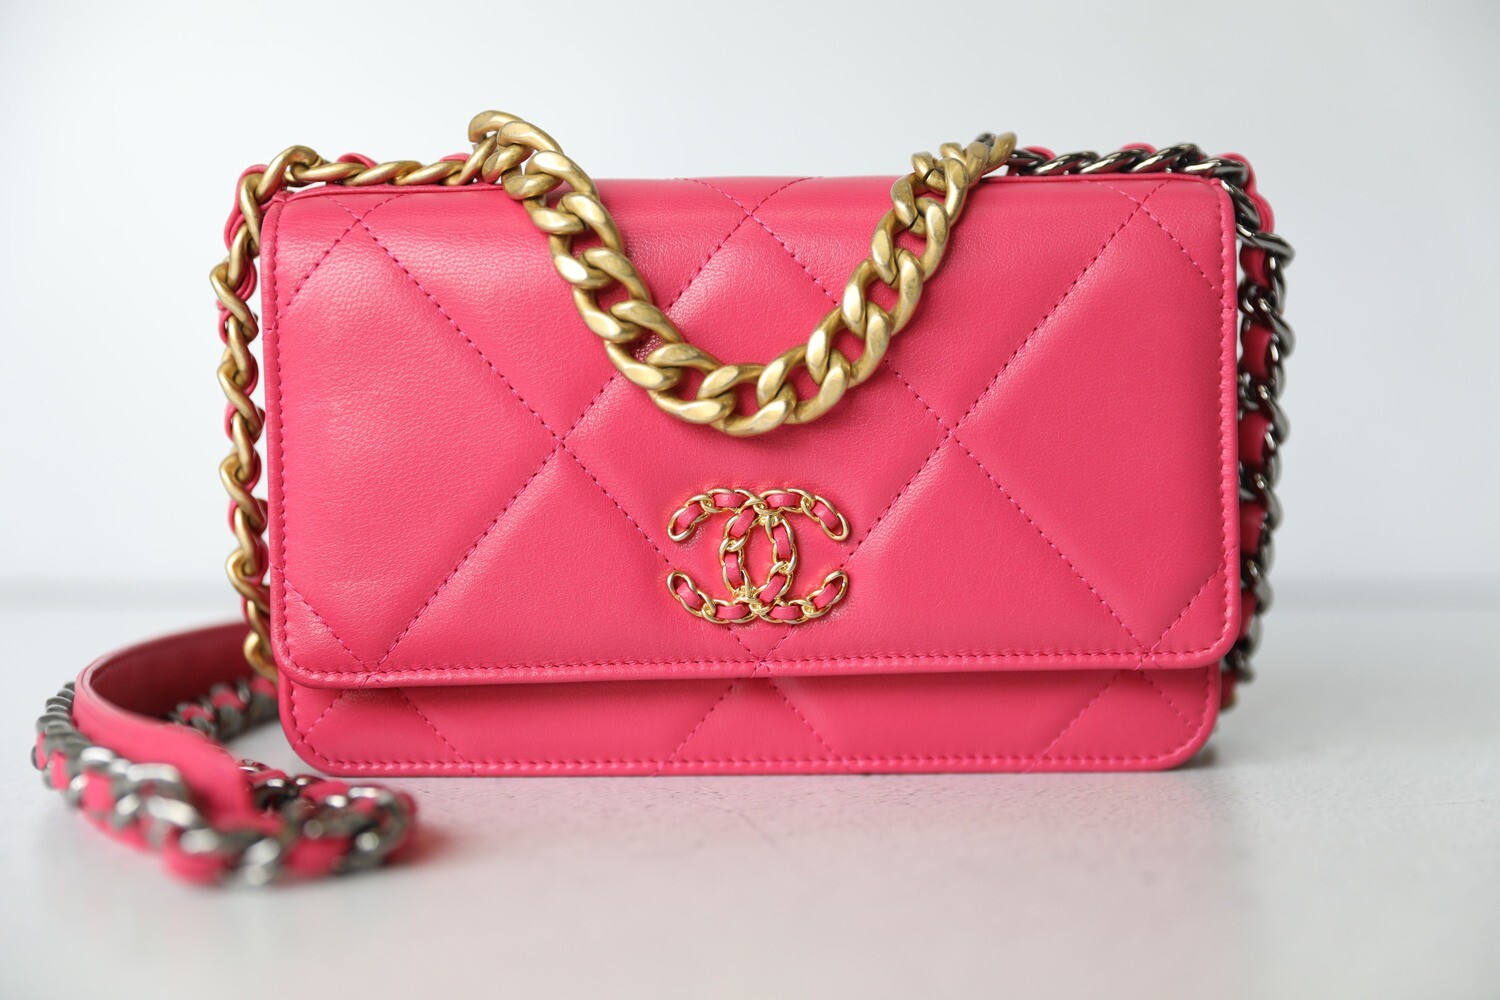 Chanel 19 Wallet on Chain, Pink Lambskin, Preowned in Box WA001